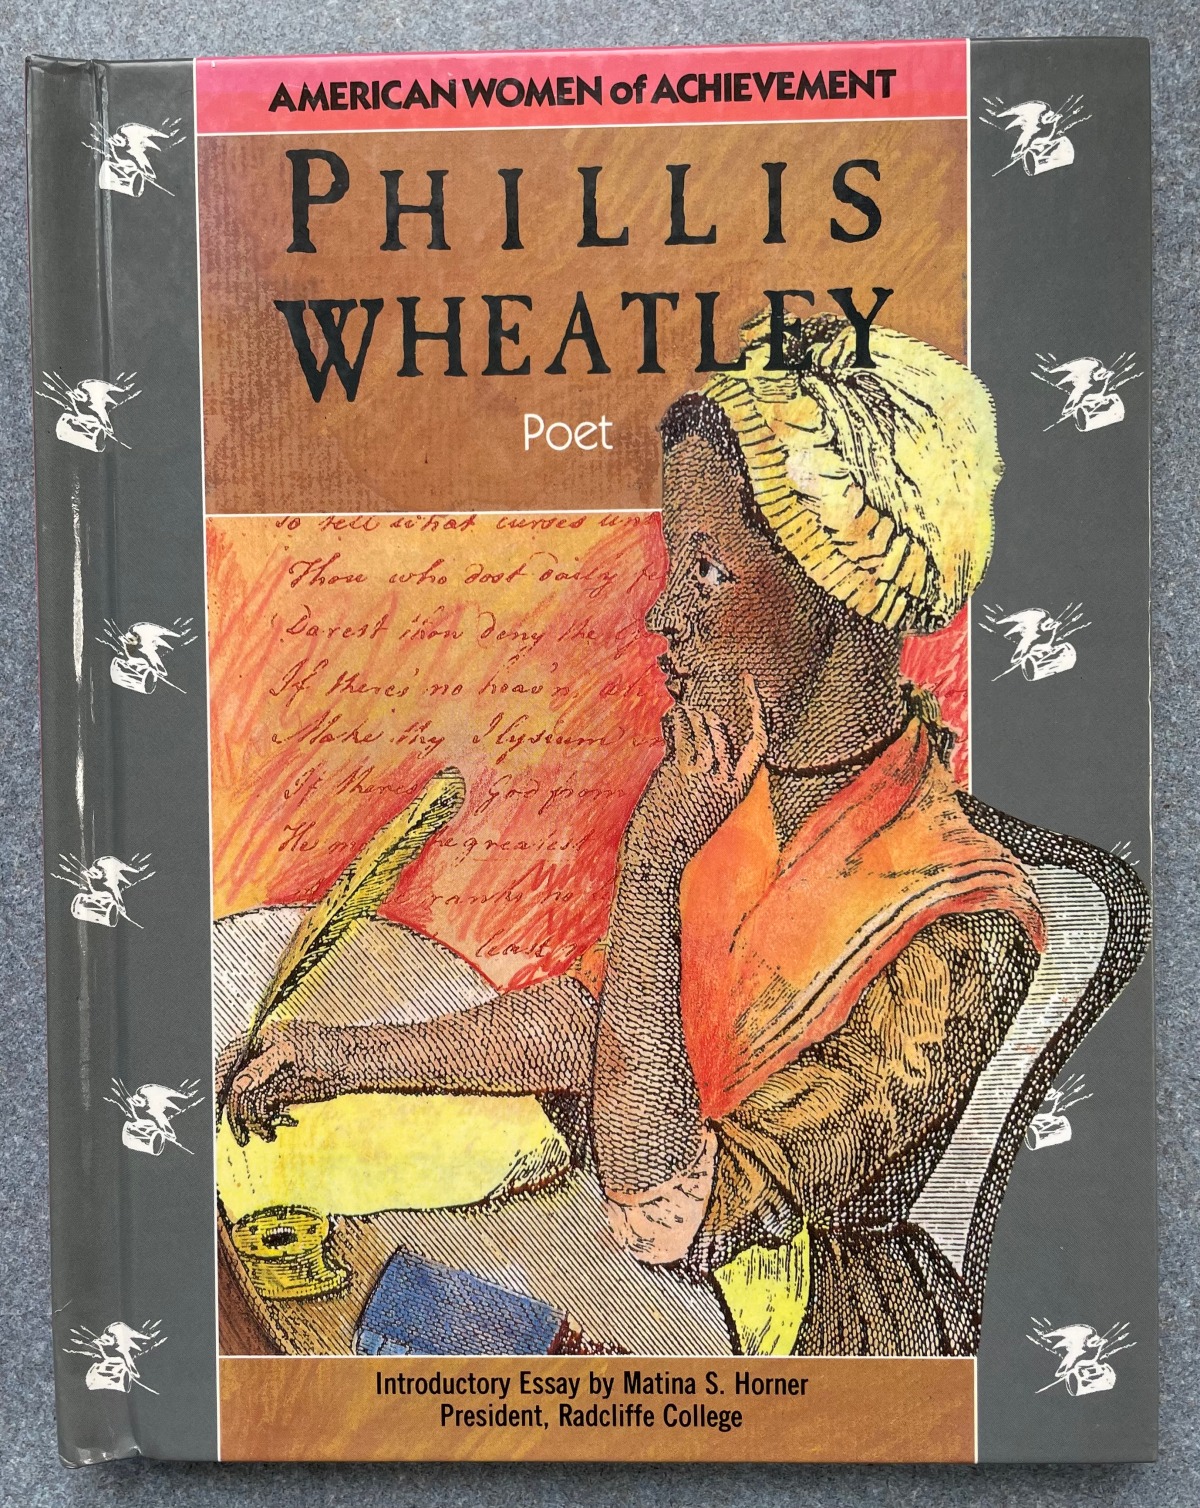 The remarkable and tragic story of Phillis Wheatley